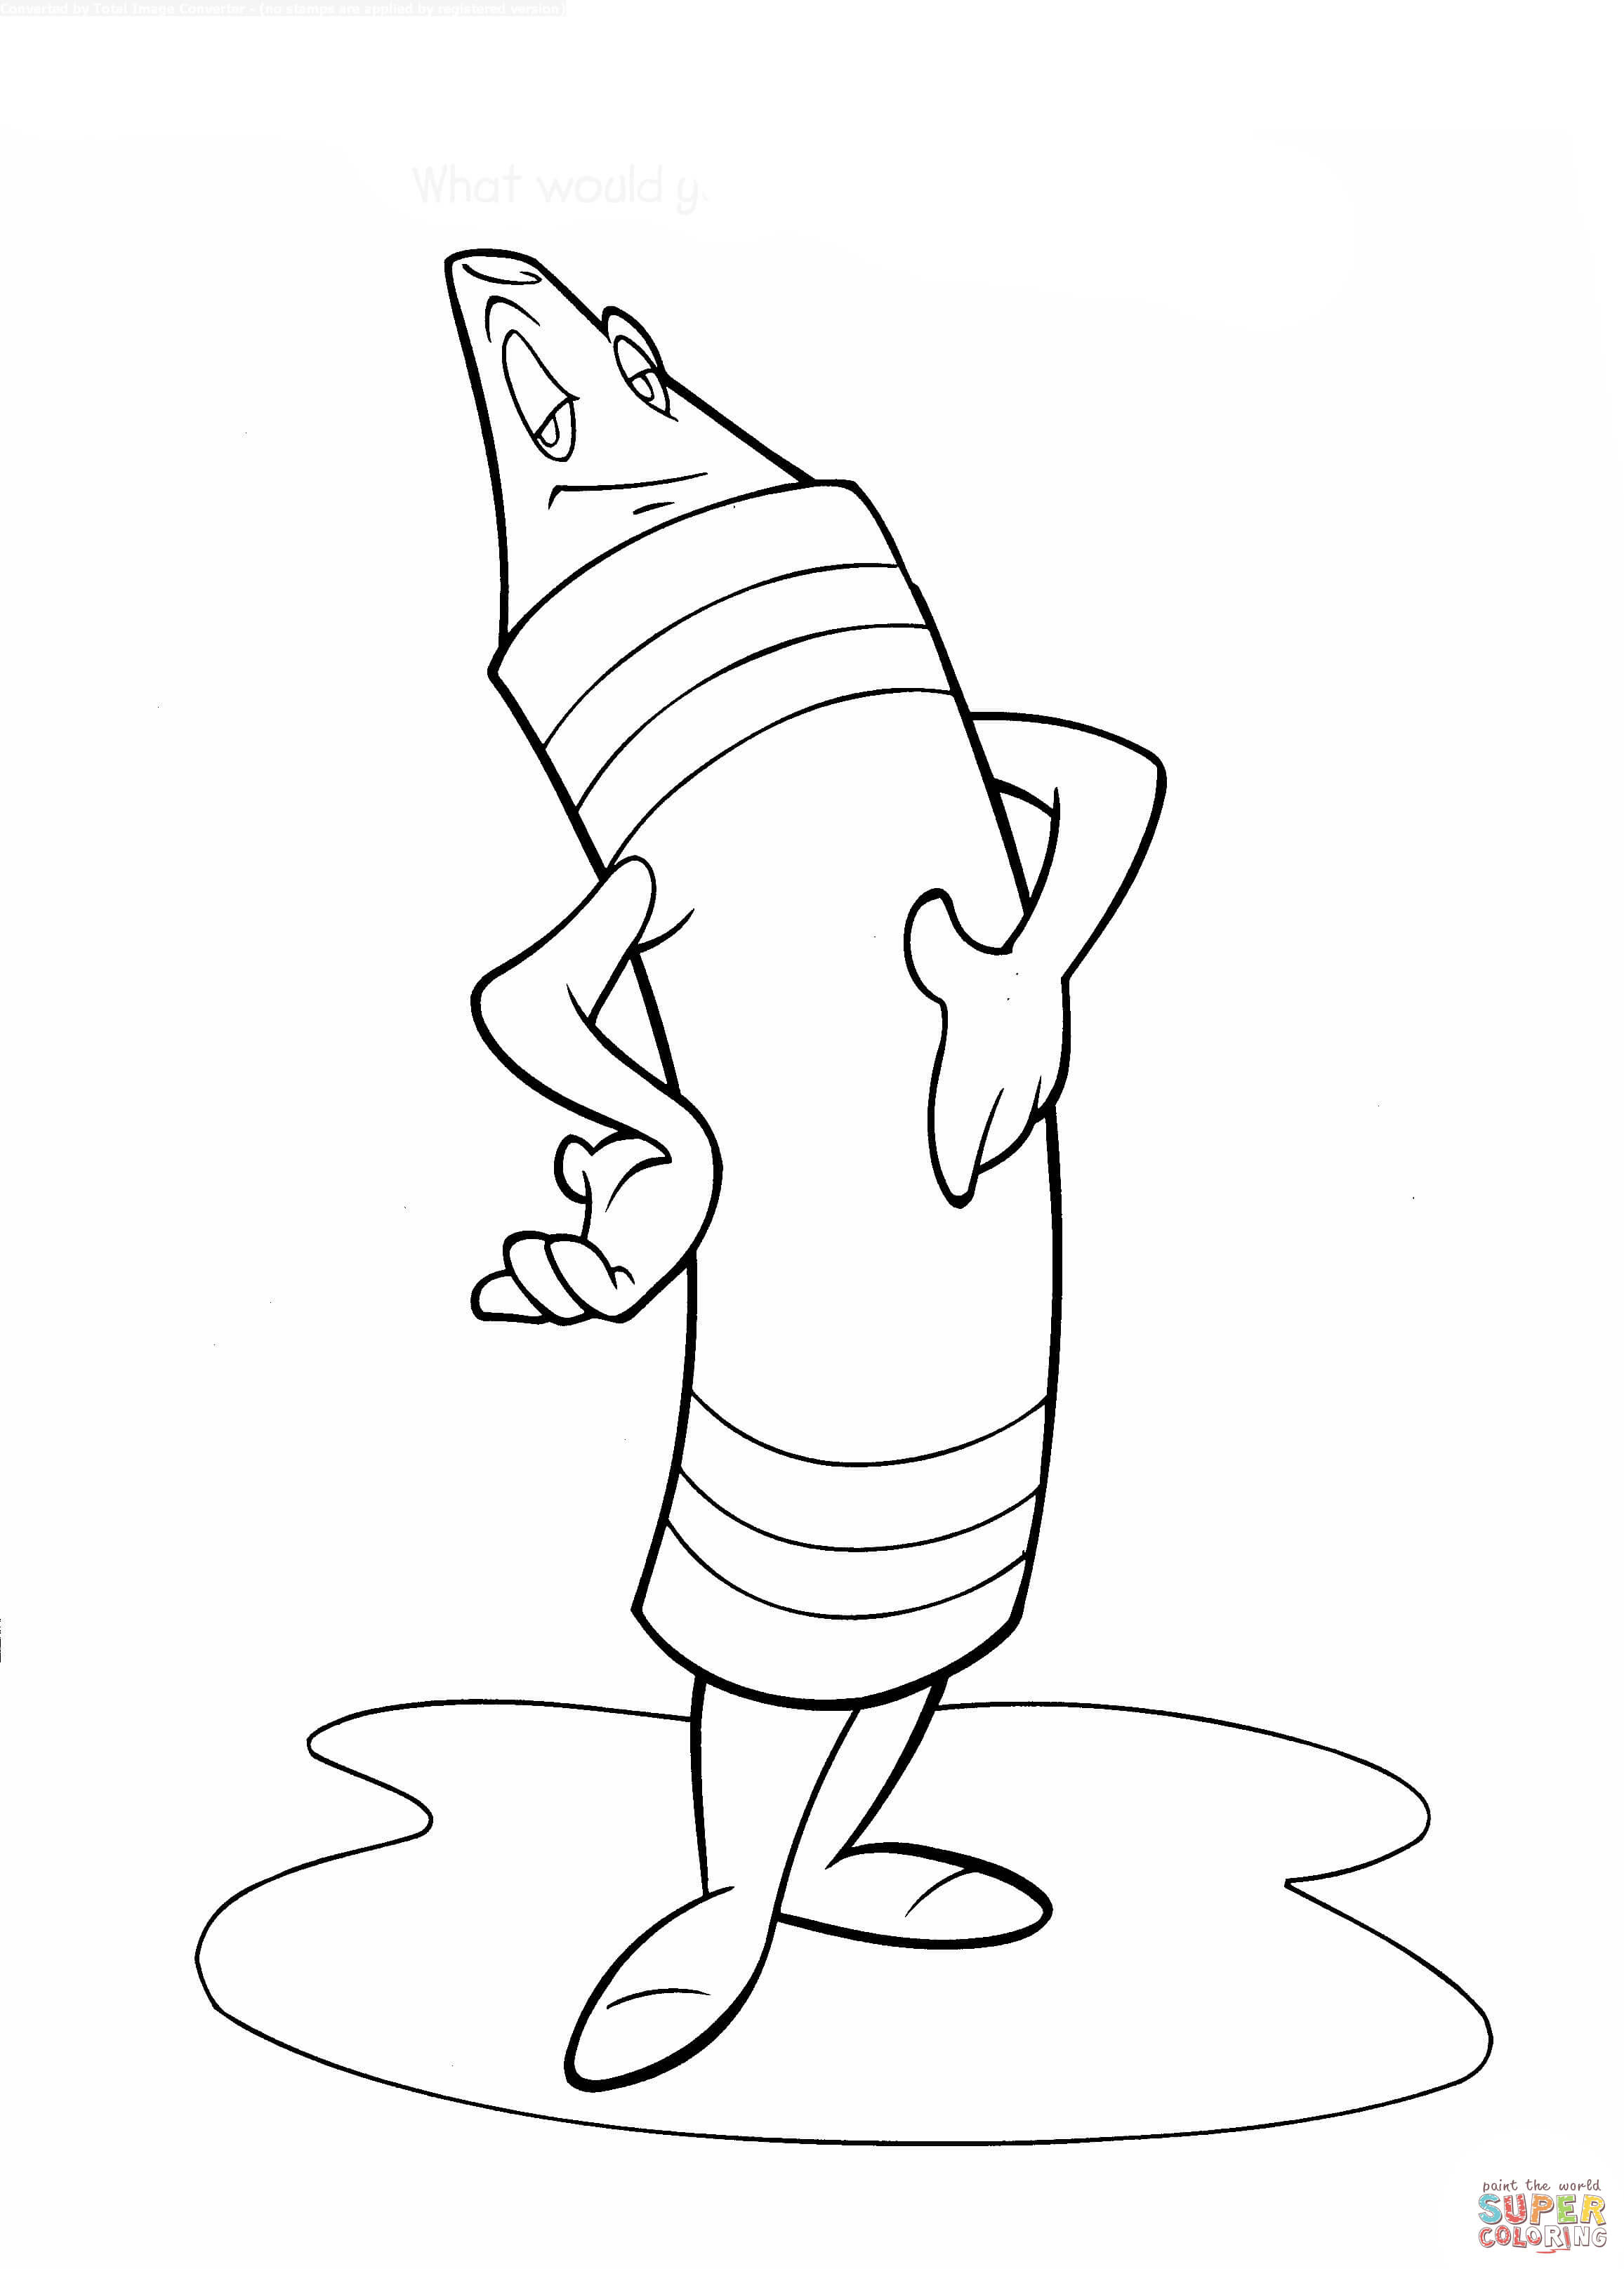 Mr Crayon coloring page | Free Printable Coloring Pages